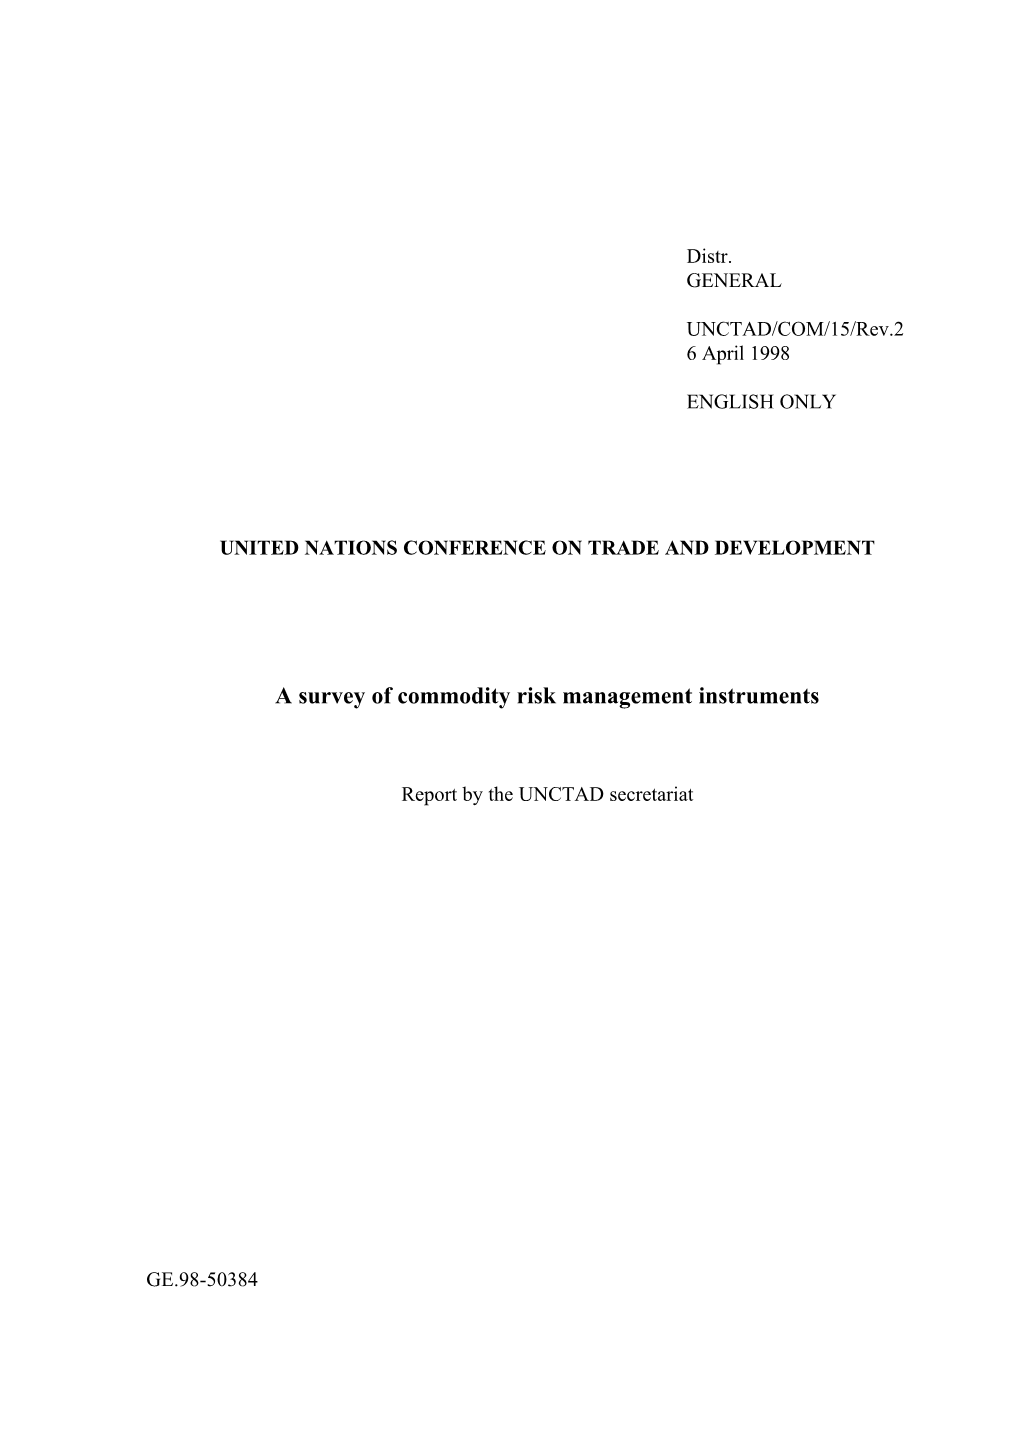 A Survey of Commodity Risk Management Instruments